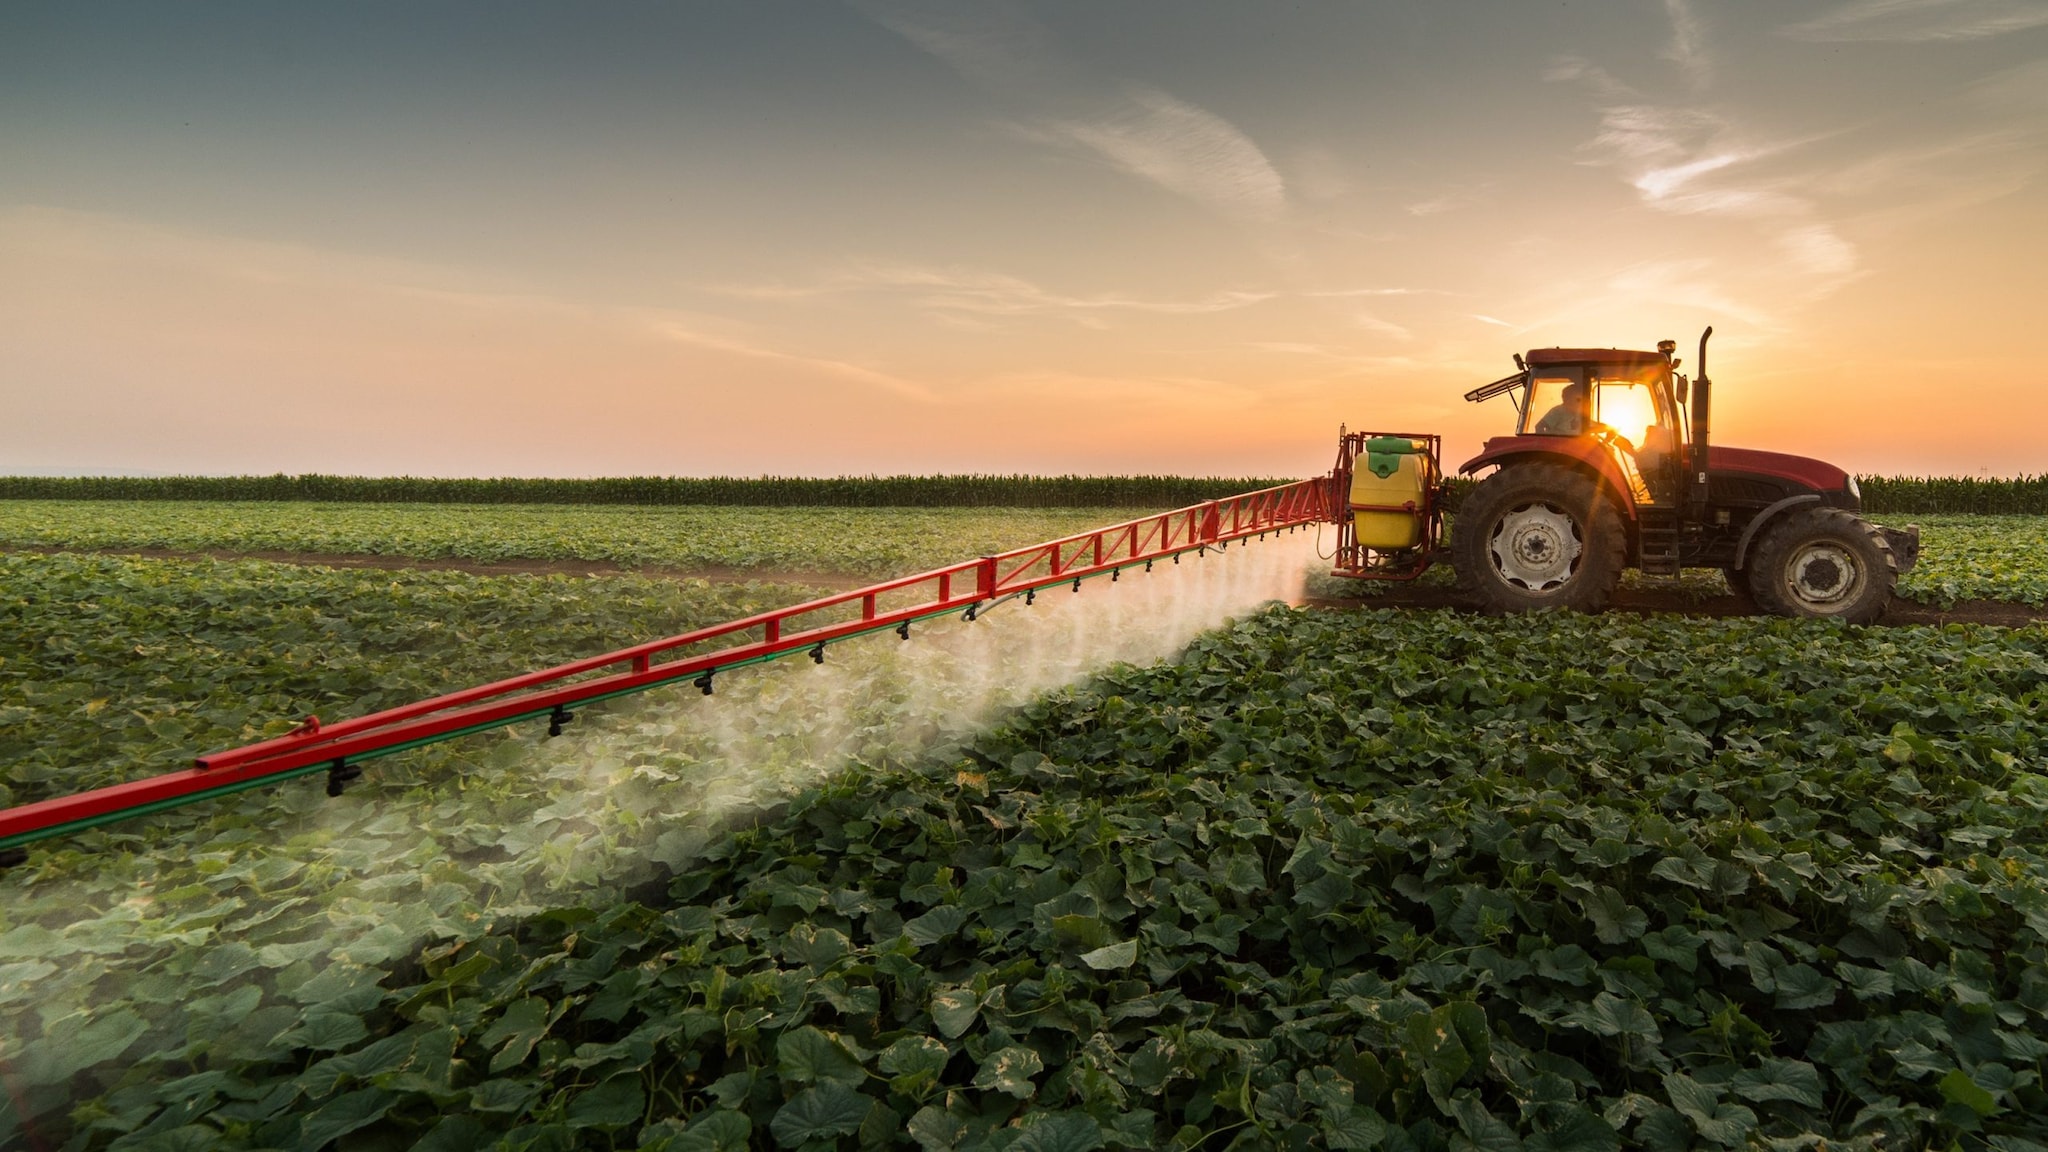 Pesticides being sprayed on a field. Image by Getty Images.